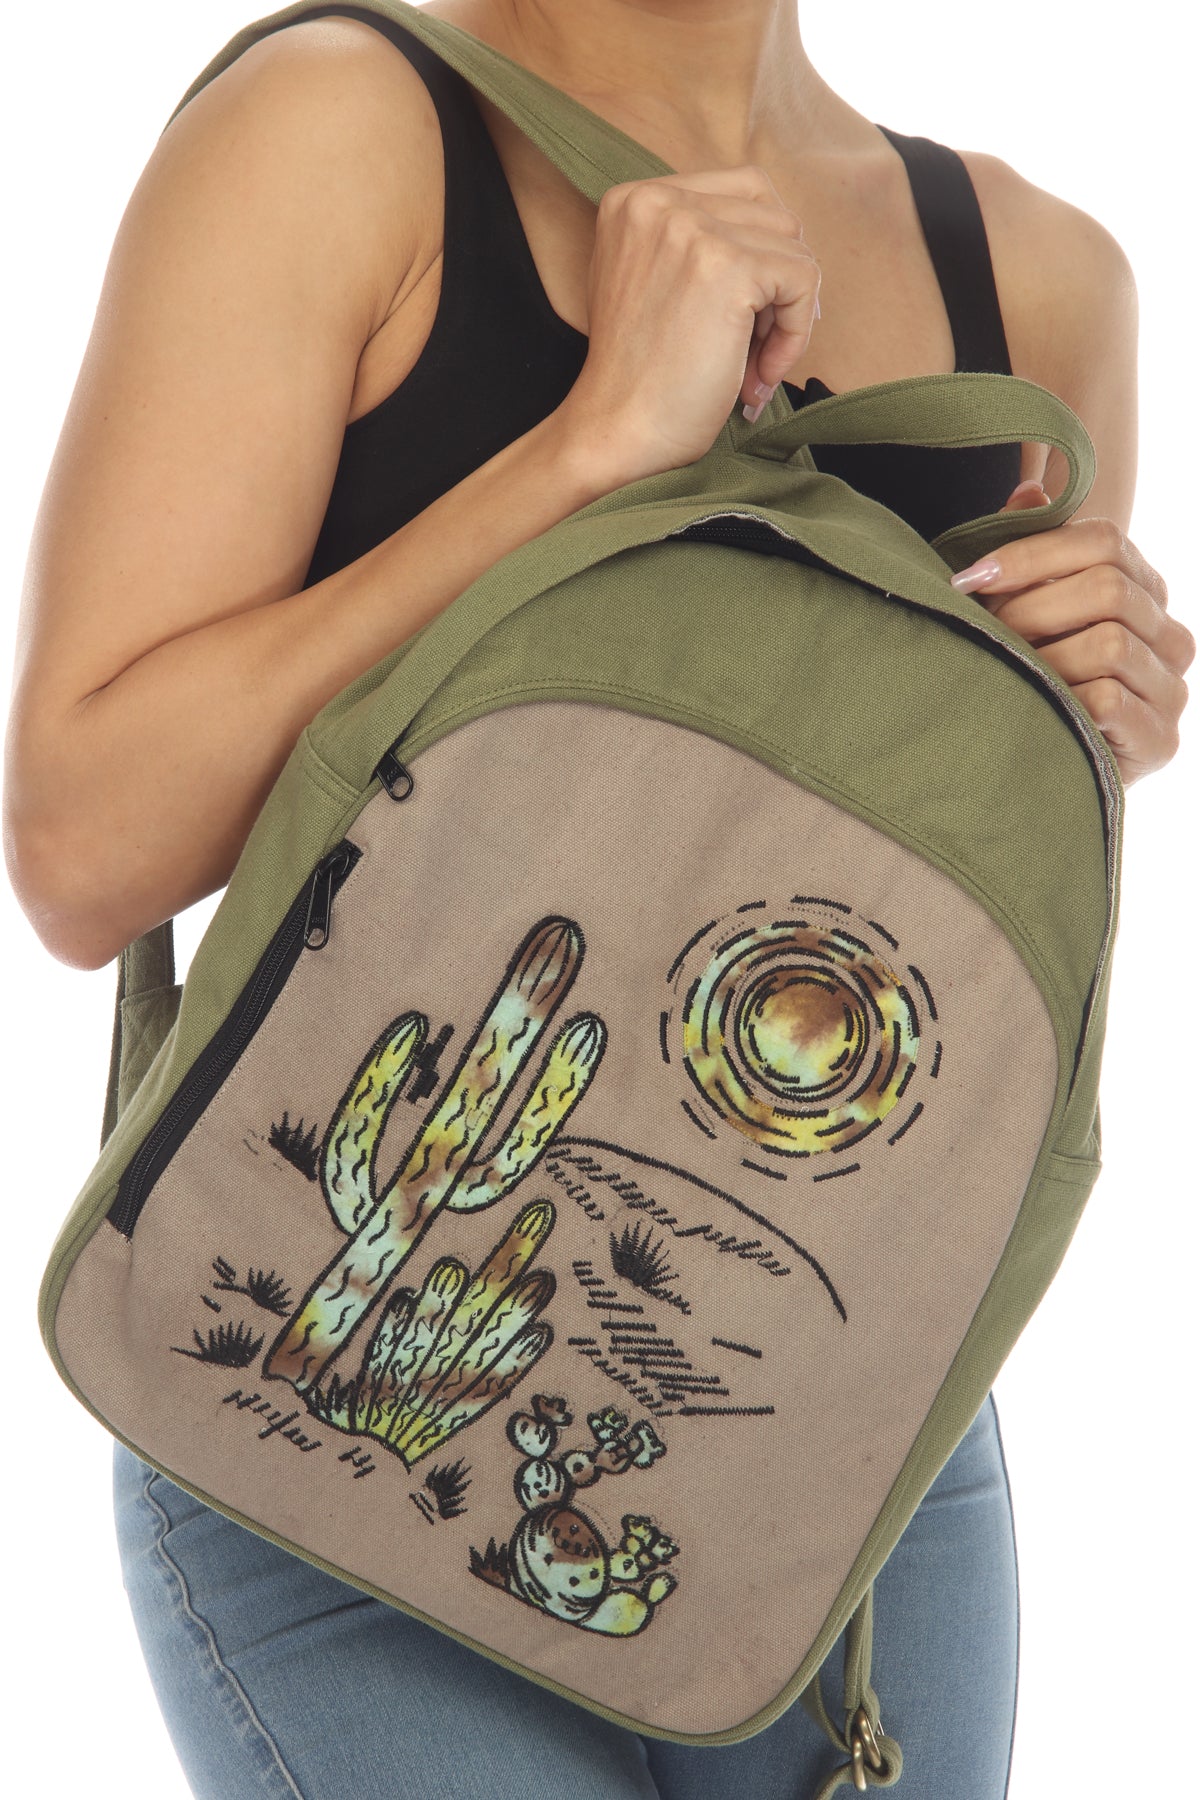 Tie-Dye Emboridary Patch BackPack